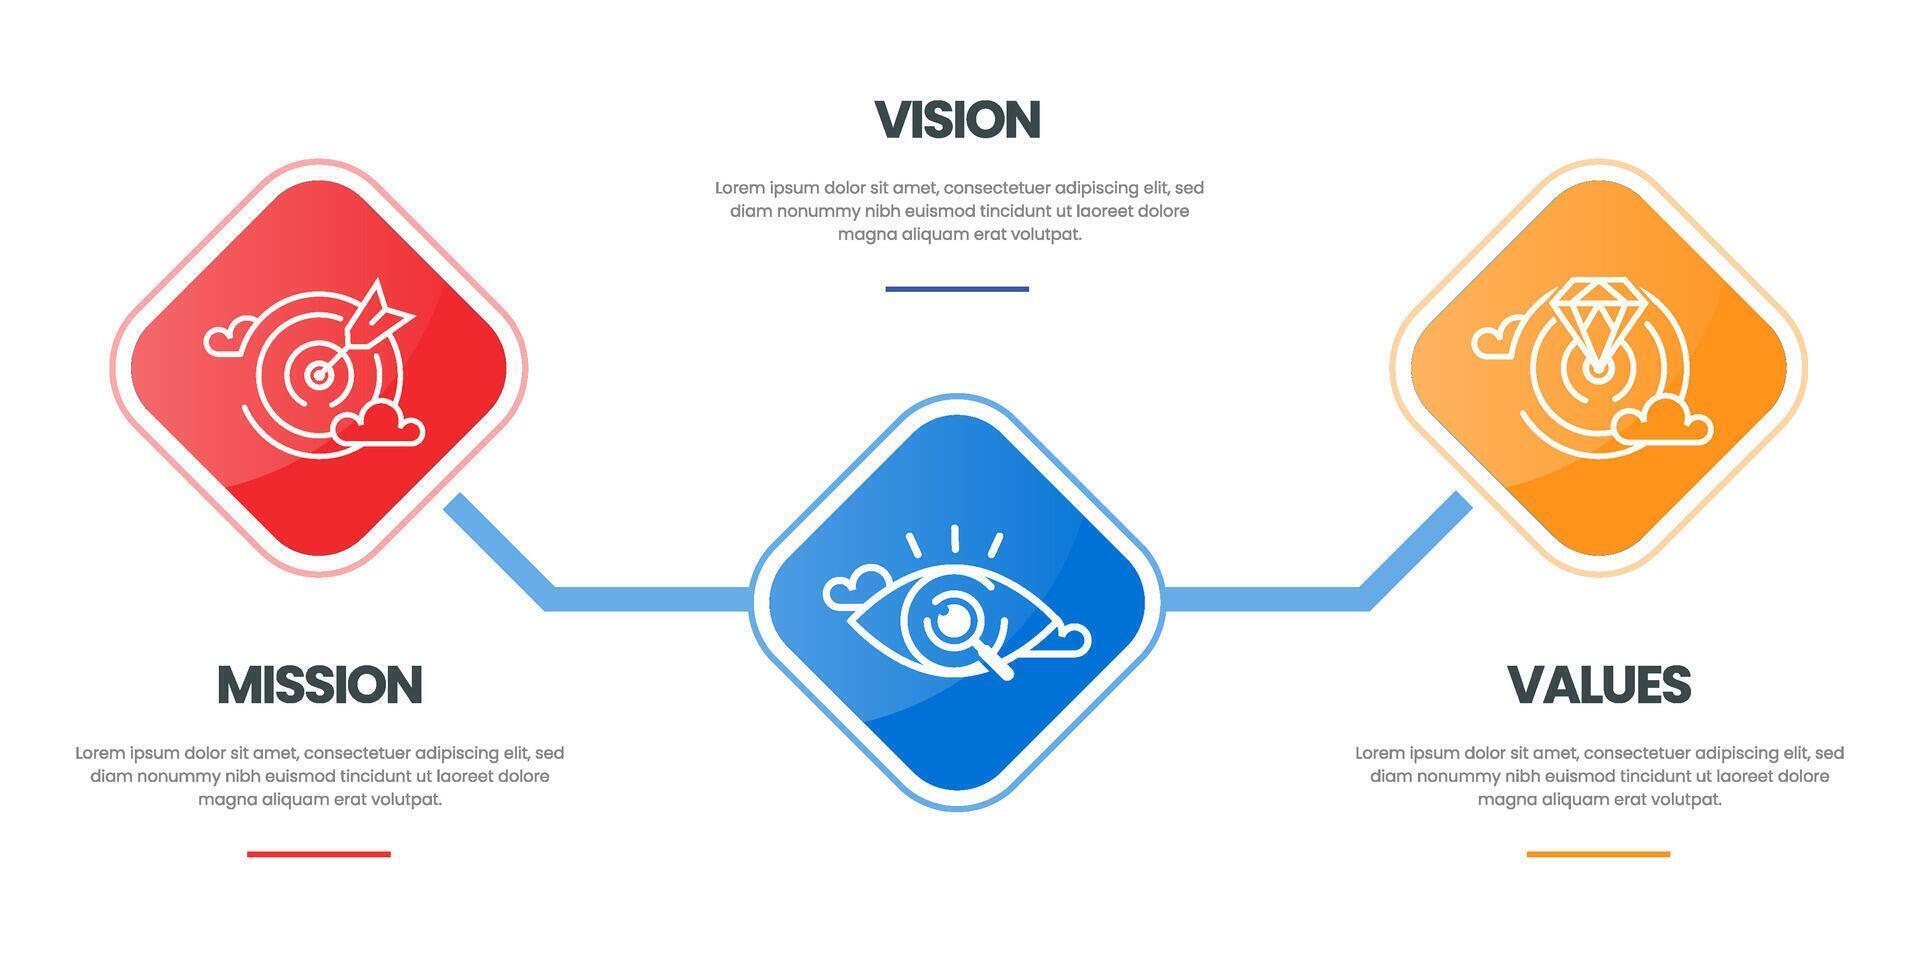 Mission vision values infographic banner template company goal infographic design with flat icon vector